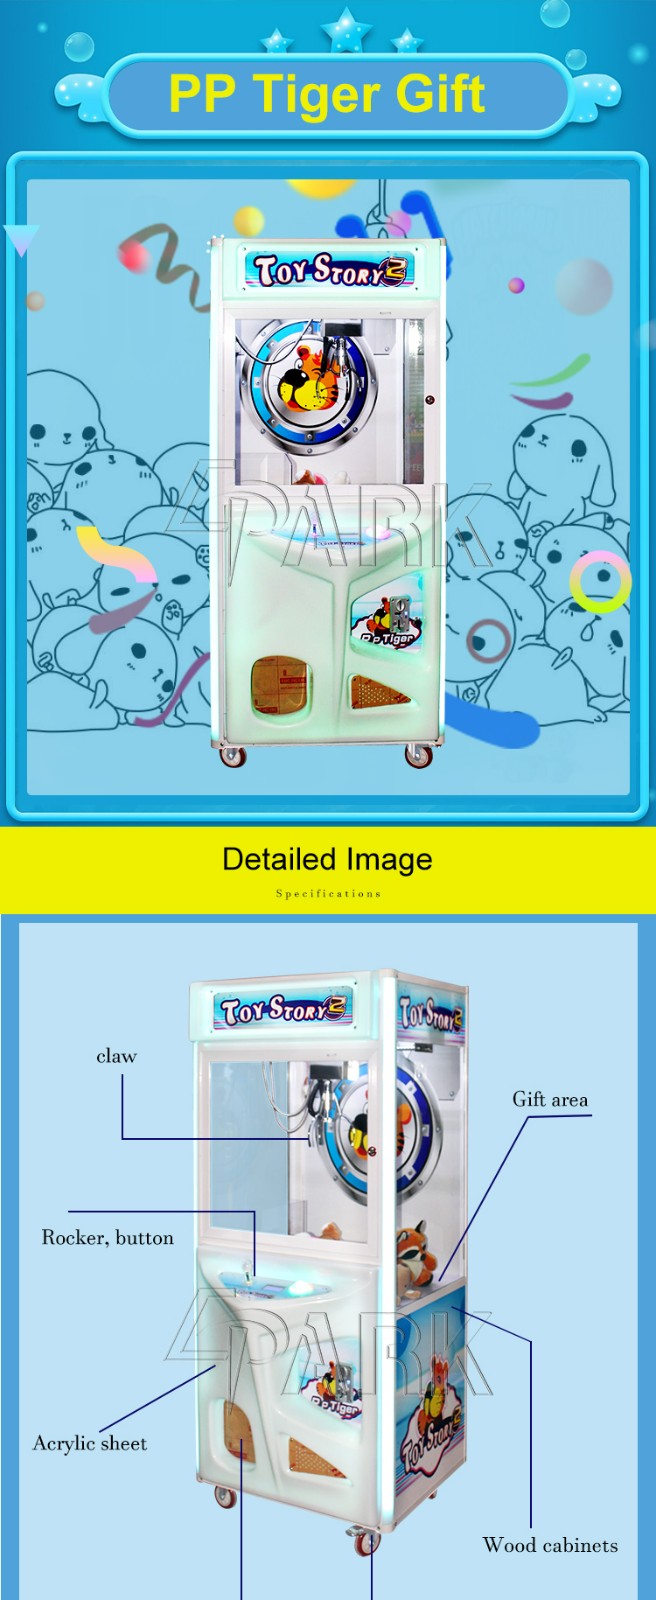 Electronic Coin Operated Pp Tiger 2 Toy Crane Gift Claw Crane Game Machine India Hot Selling